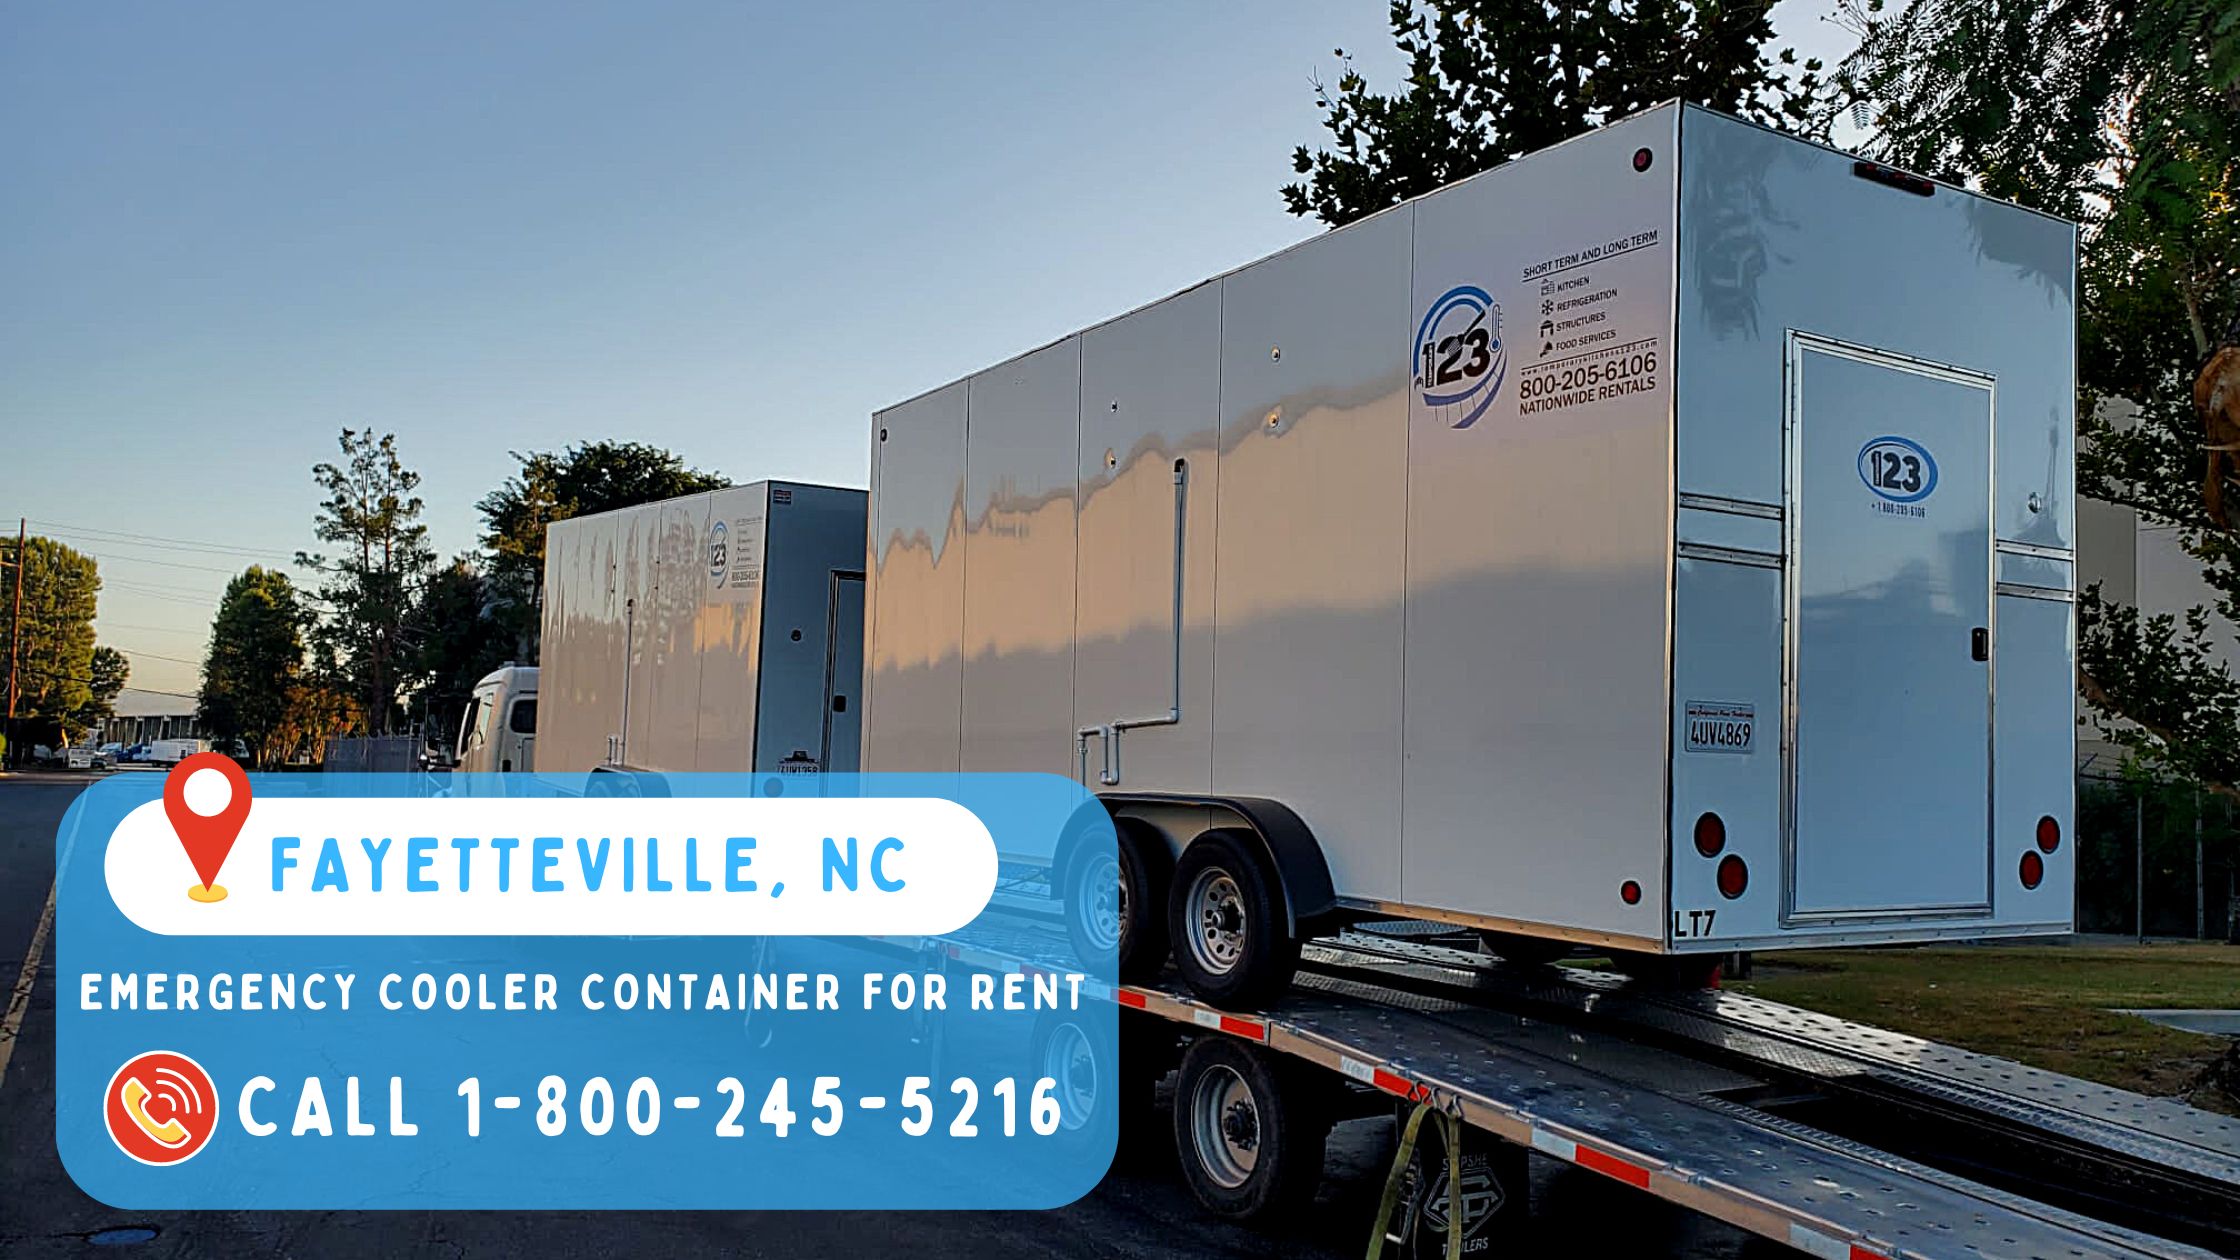 Emergency Cooler Container for Rent in Fayetteville